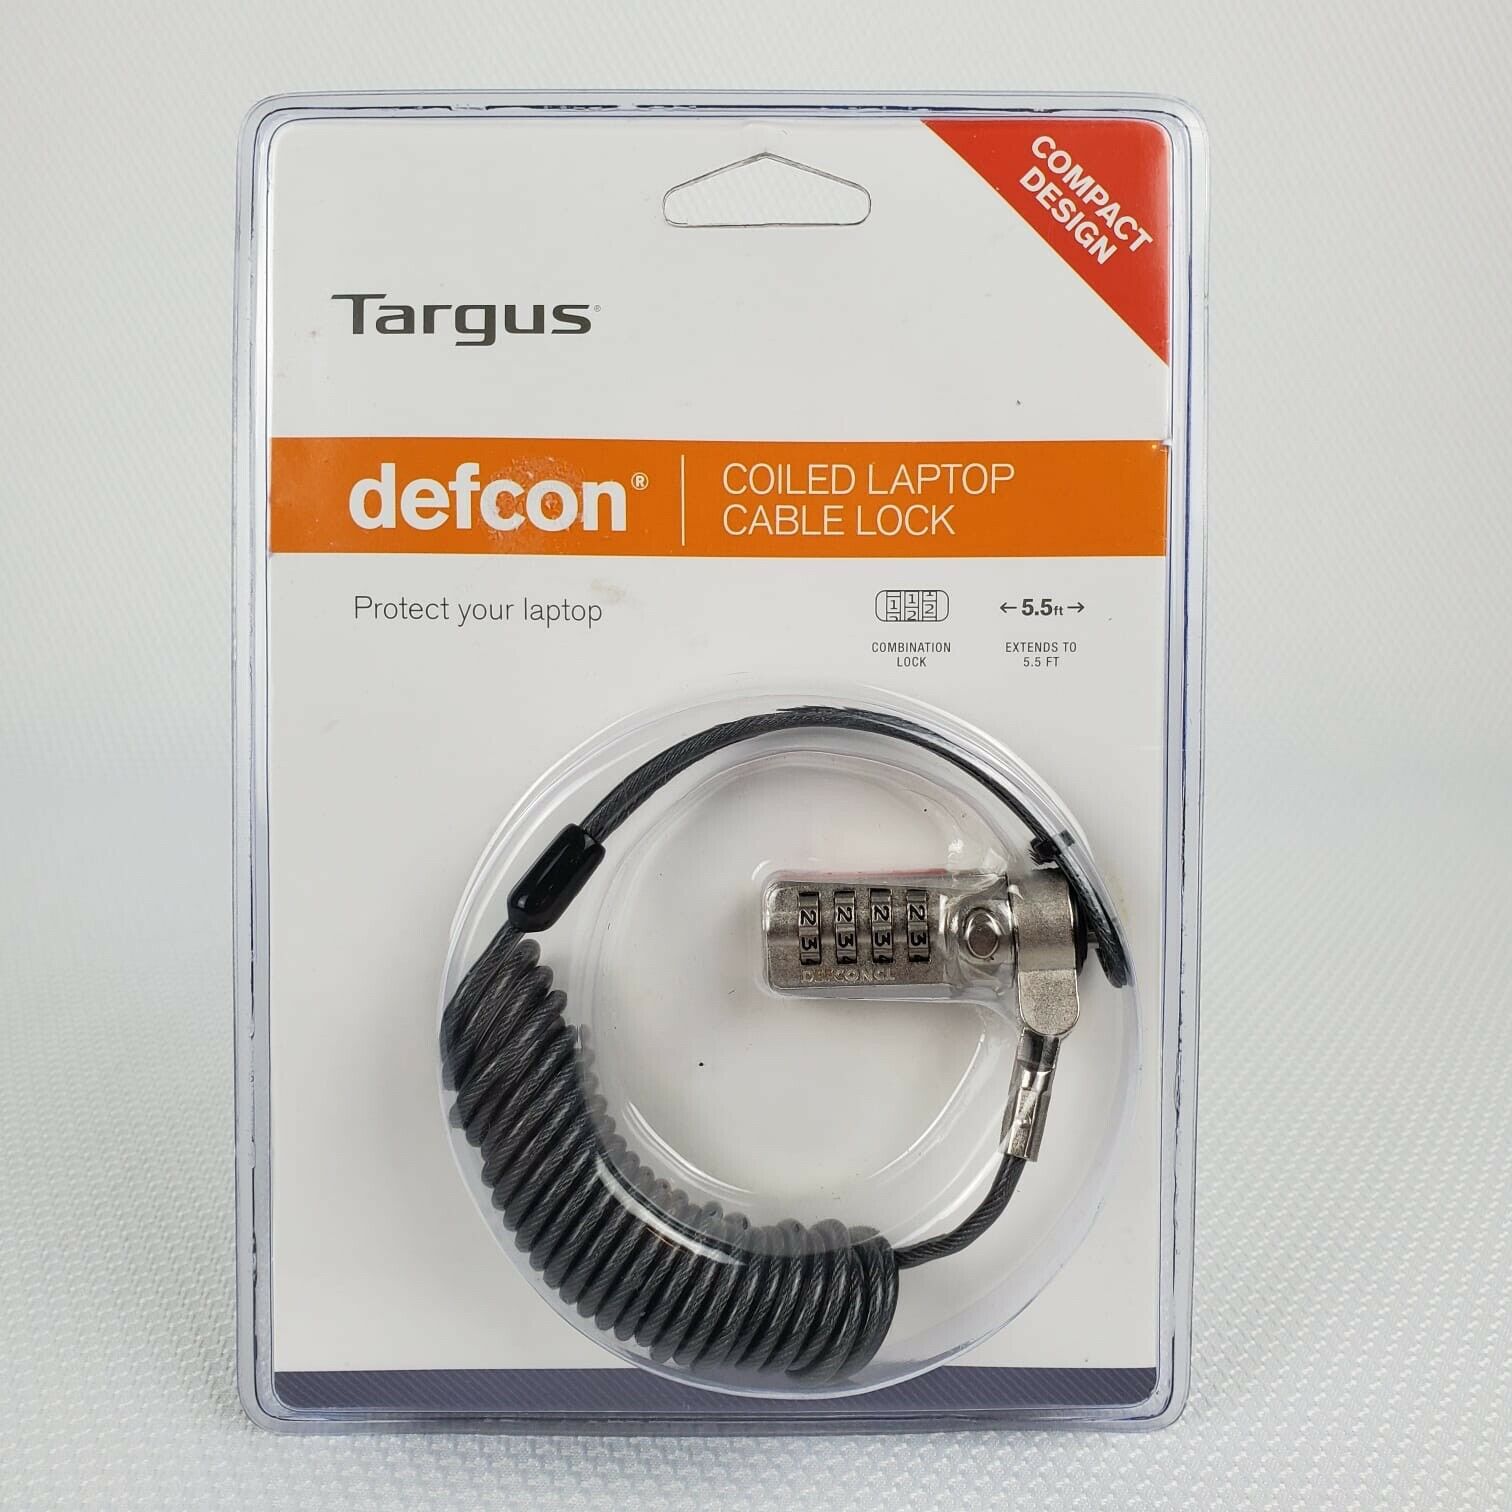 Targus Defcon Coiled Laptop Cable Security Lock Combination 5.5 Ft